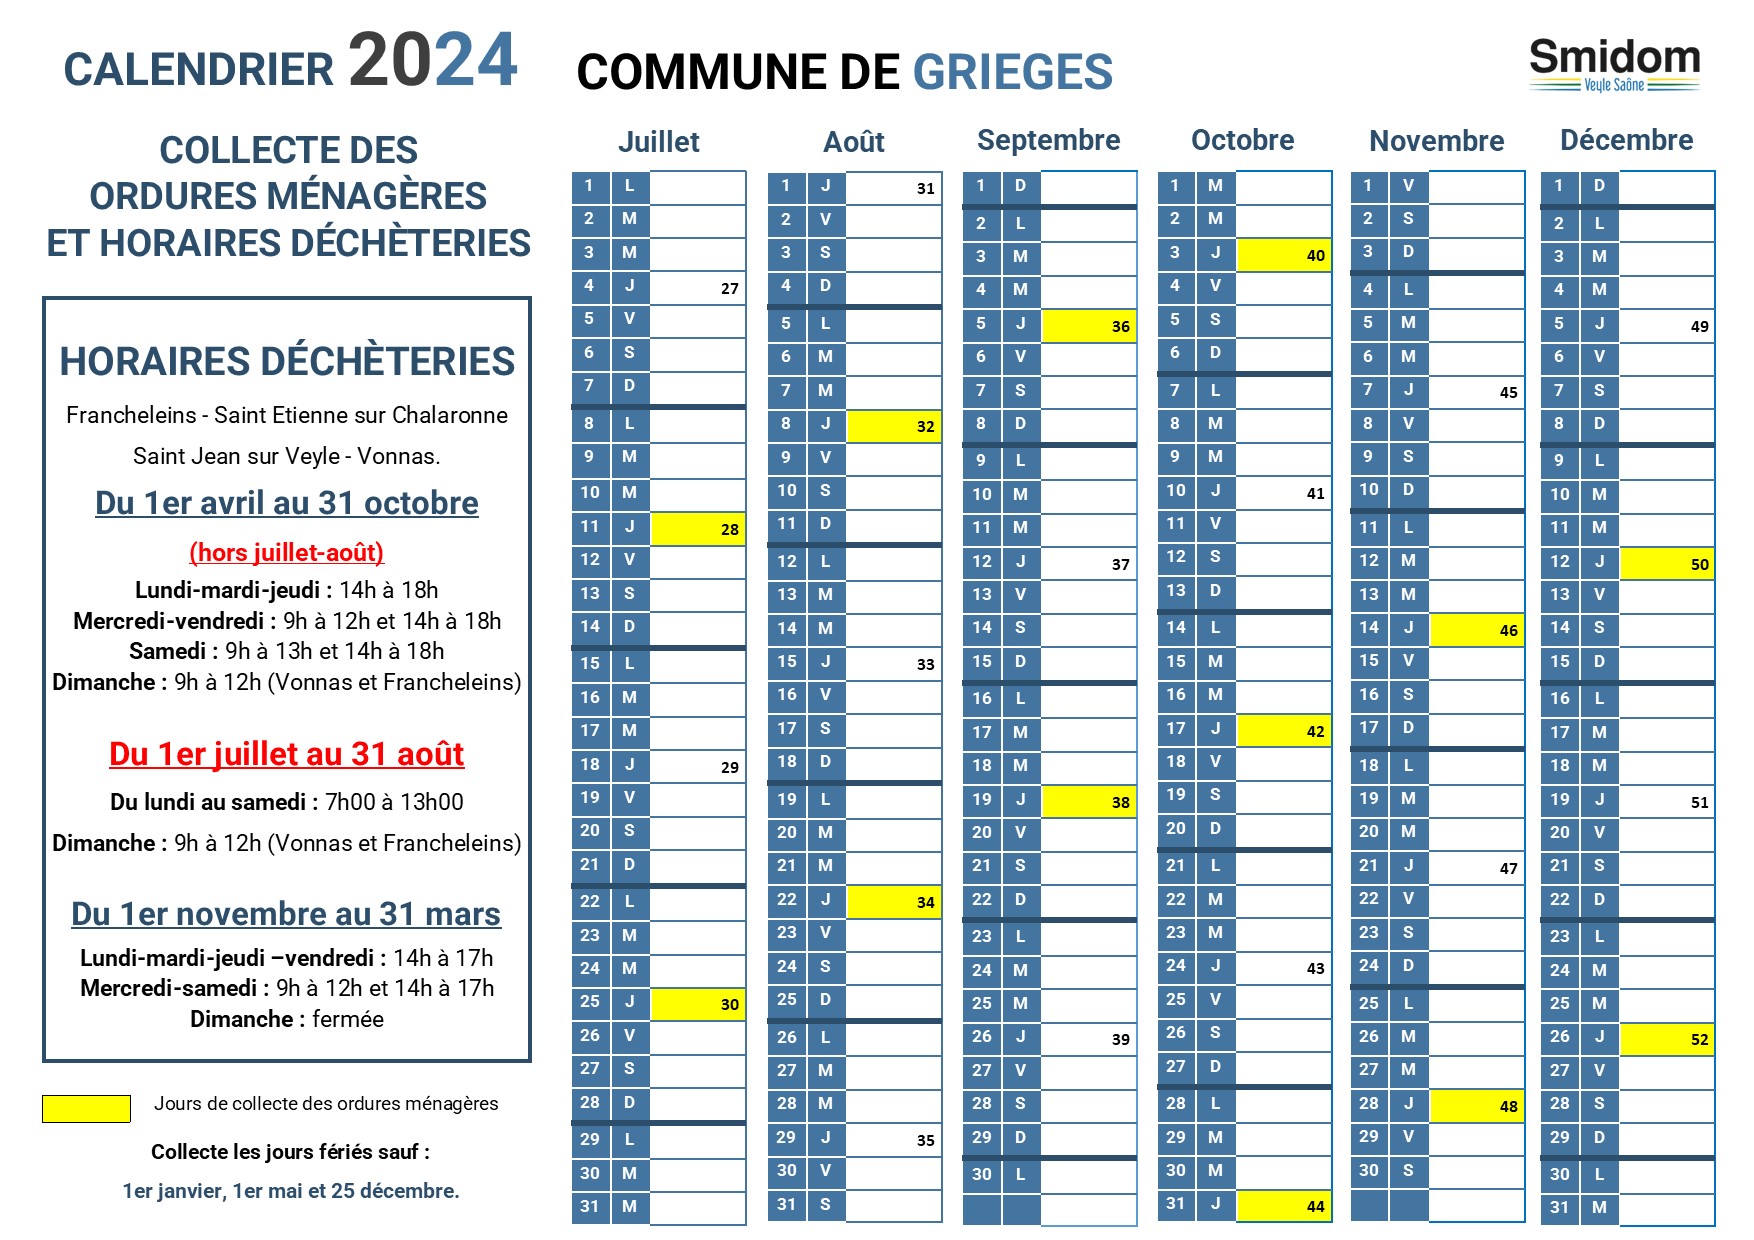 GRIEGES - Calendrier 2024 - 2.jpg